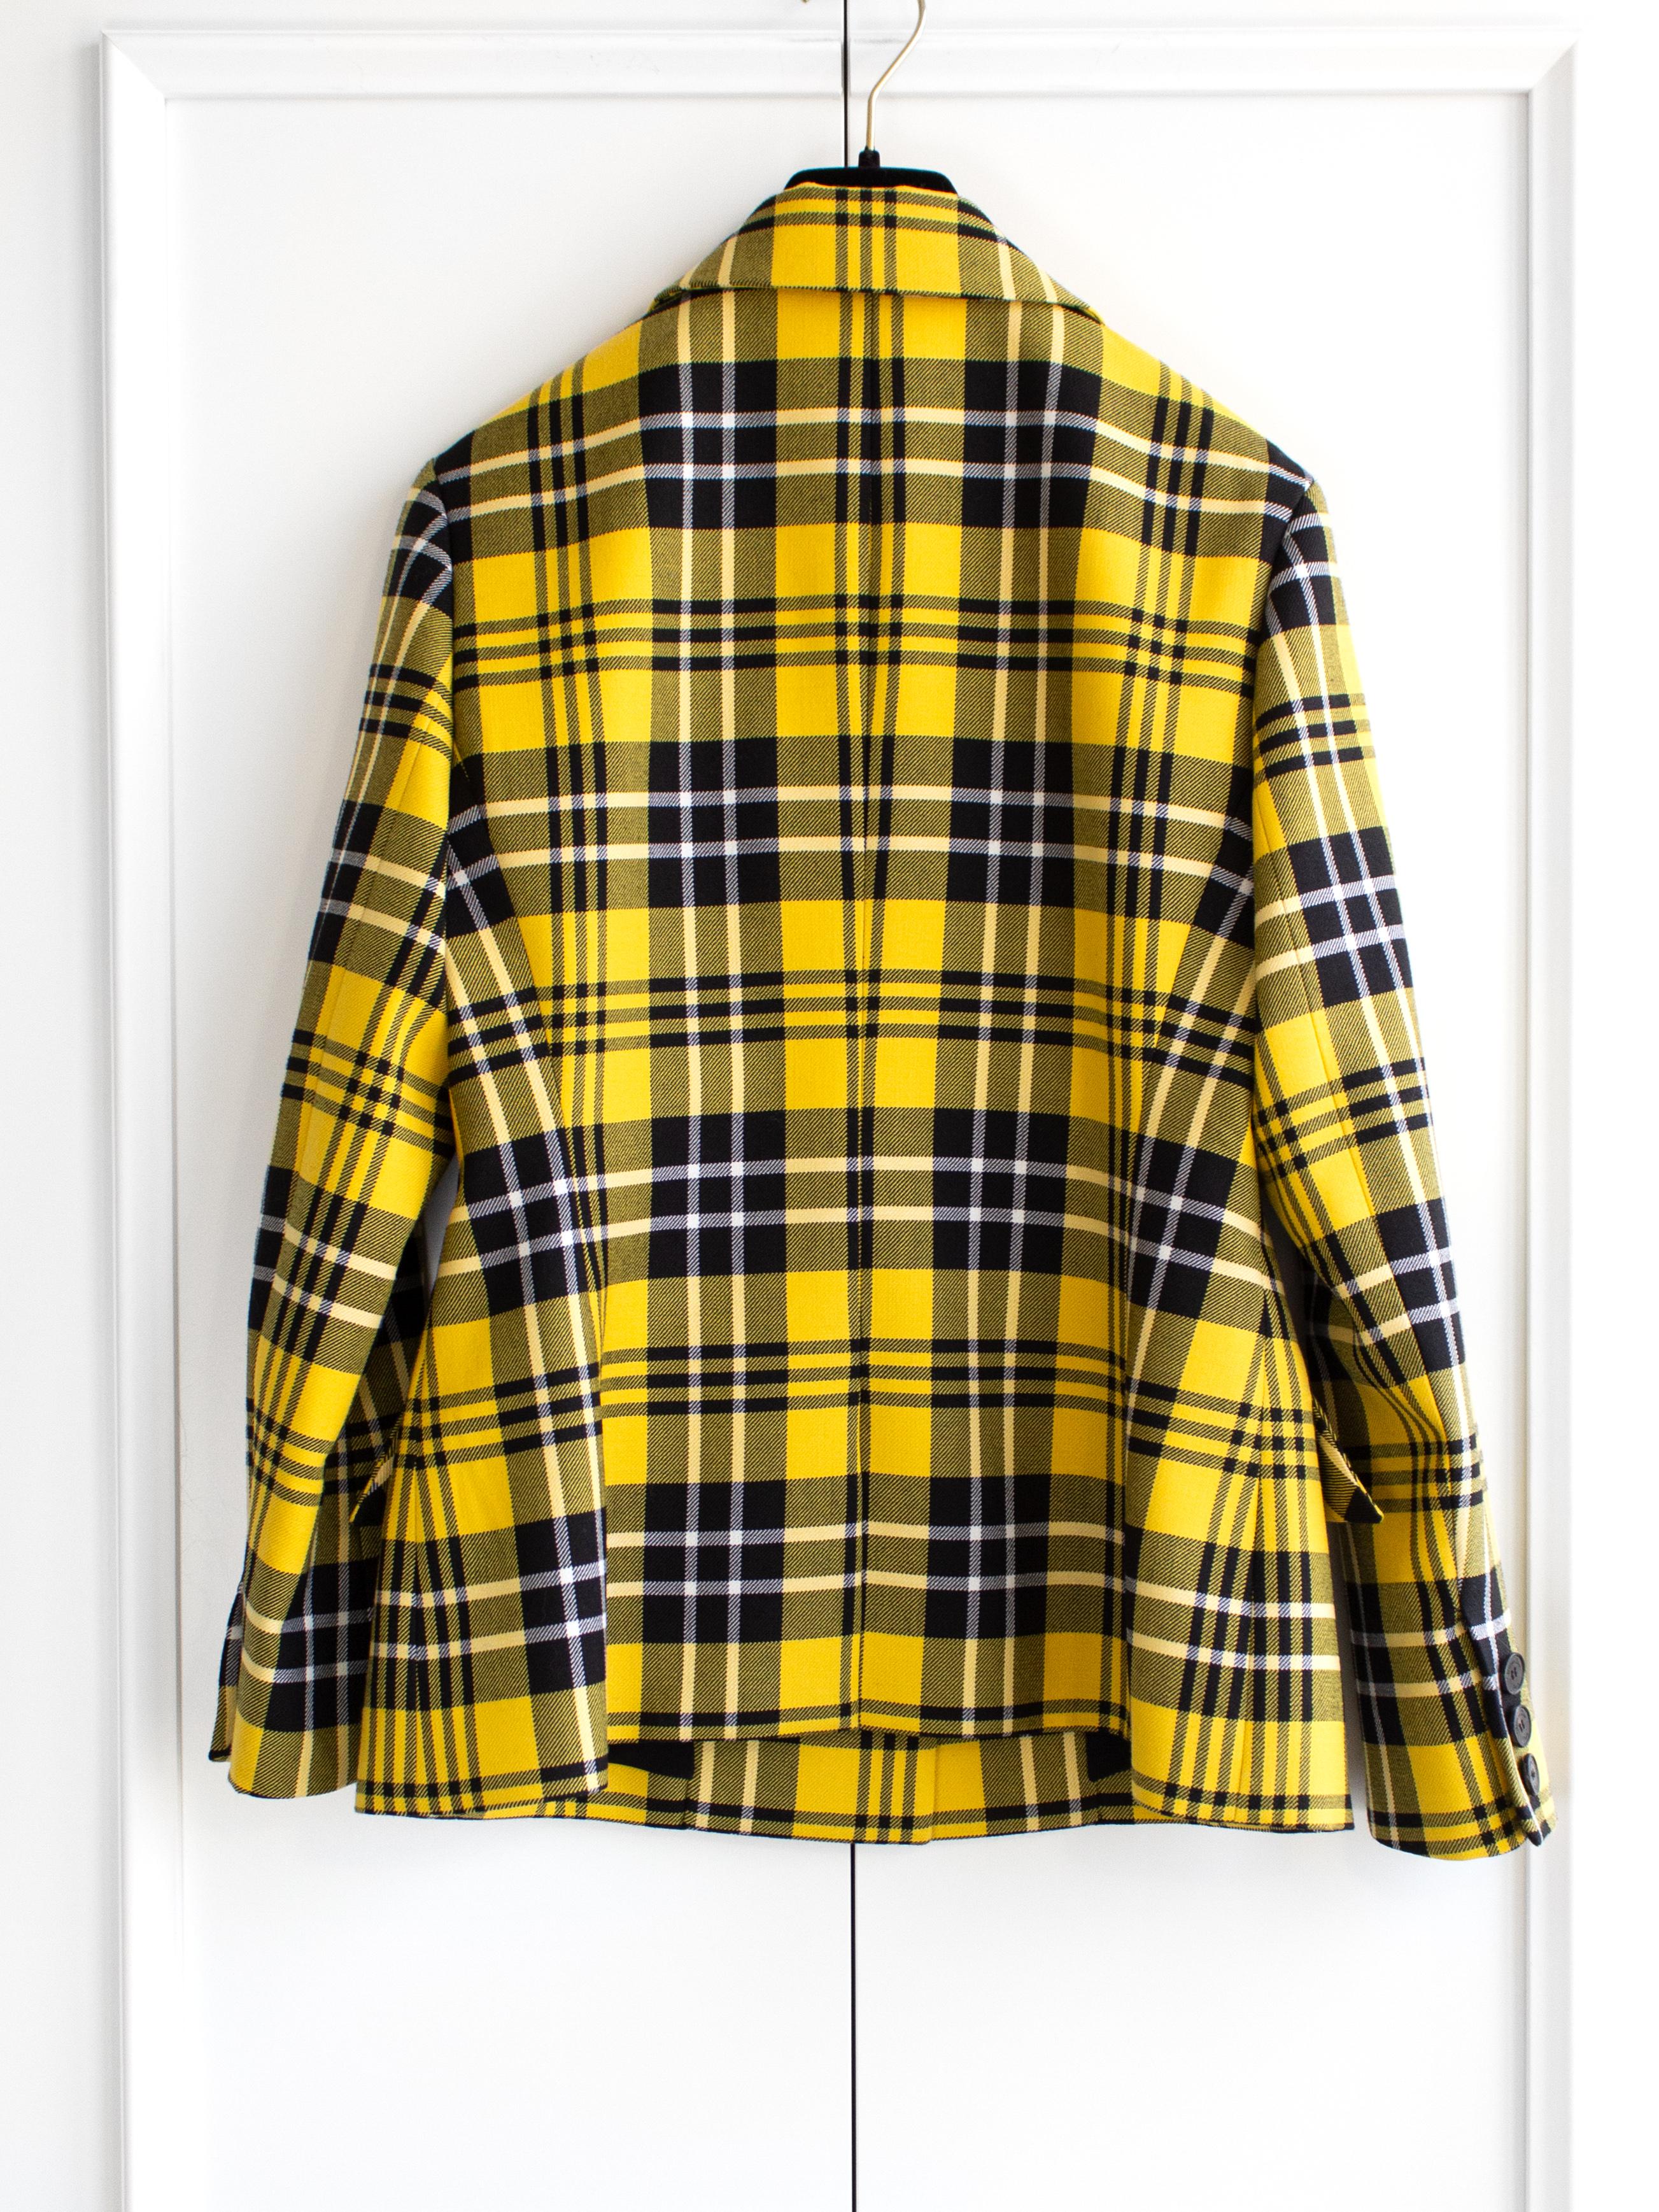 Dior Fall/Winter 2022 Yellow Black Plaid Bar Clueless Blazer Jacket In Excellent Condition For Sale In Jersey City, NJ